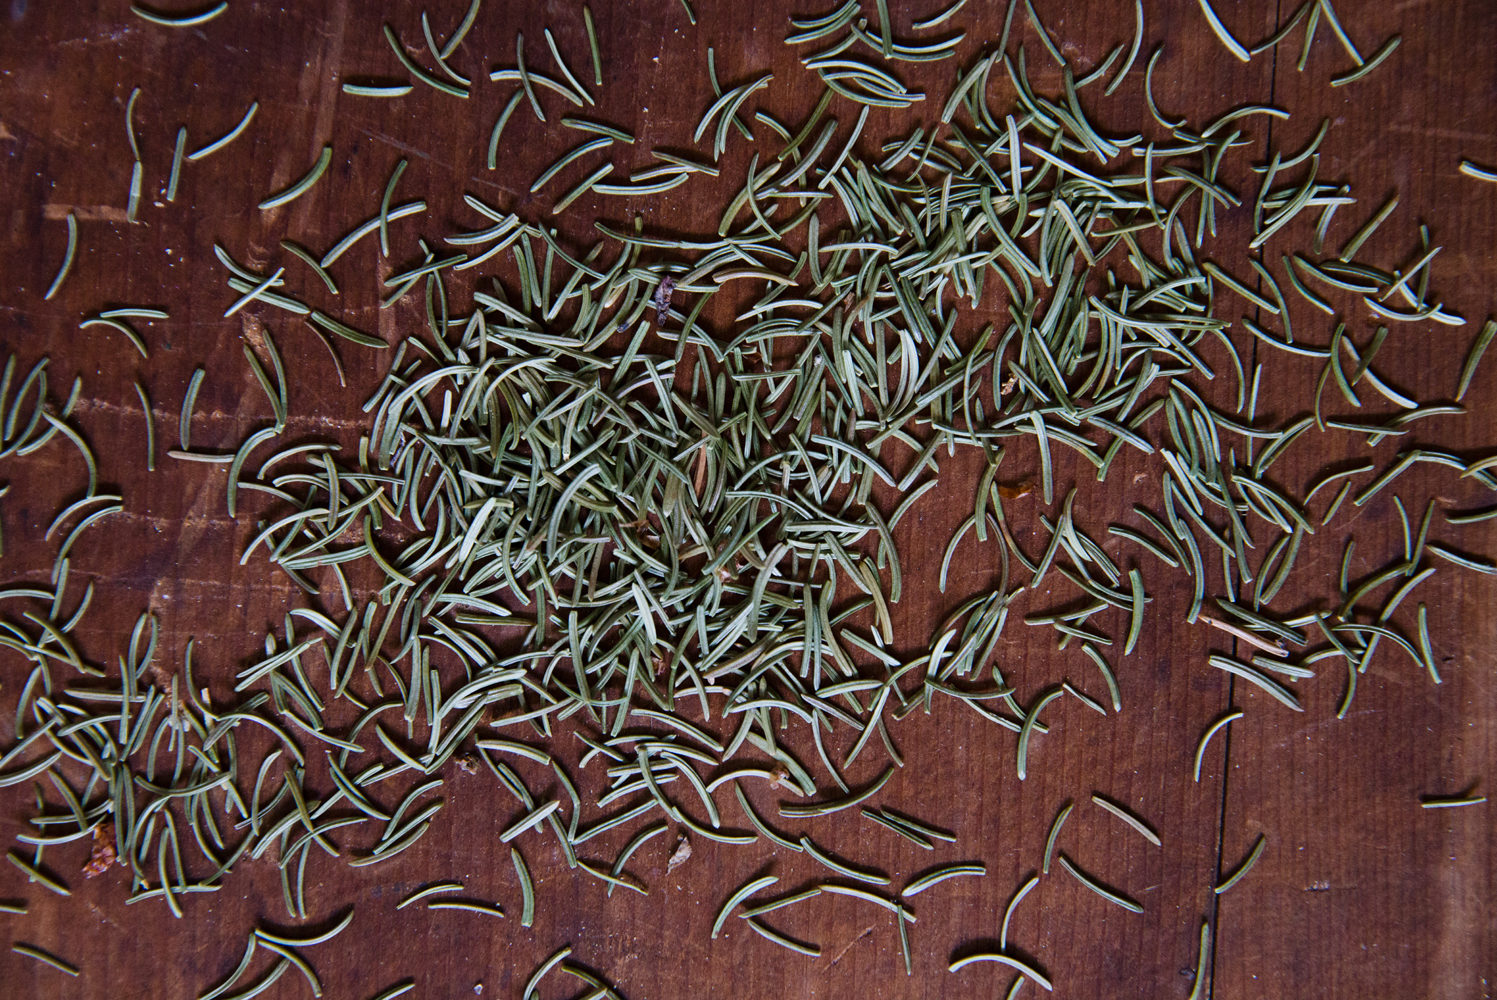 Pine needles scattered on a dark wooden table